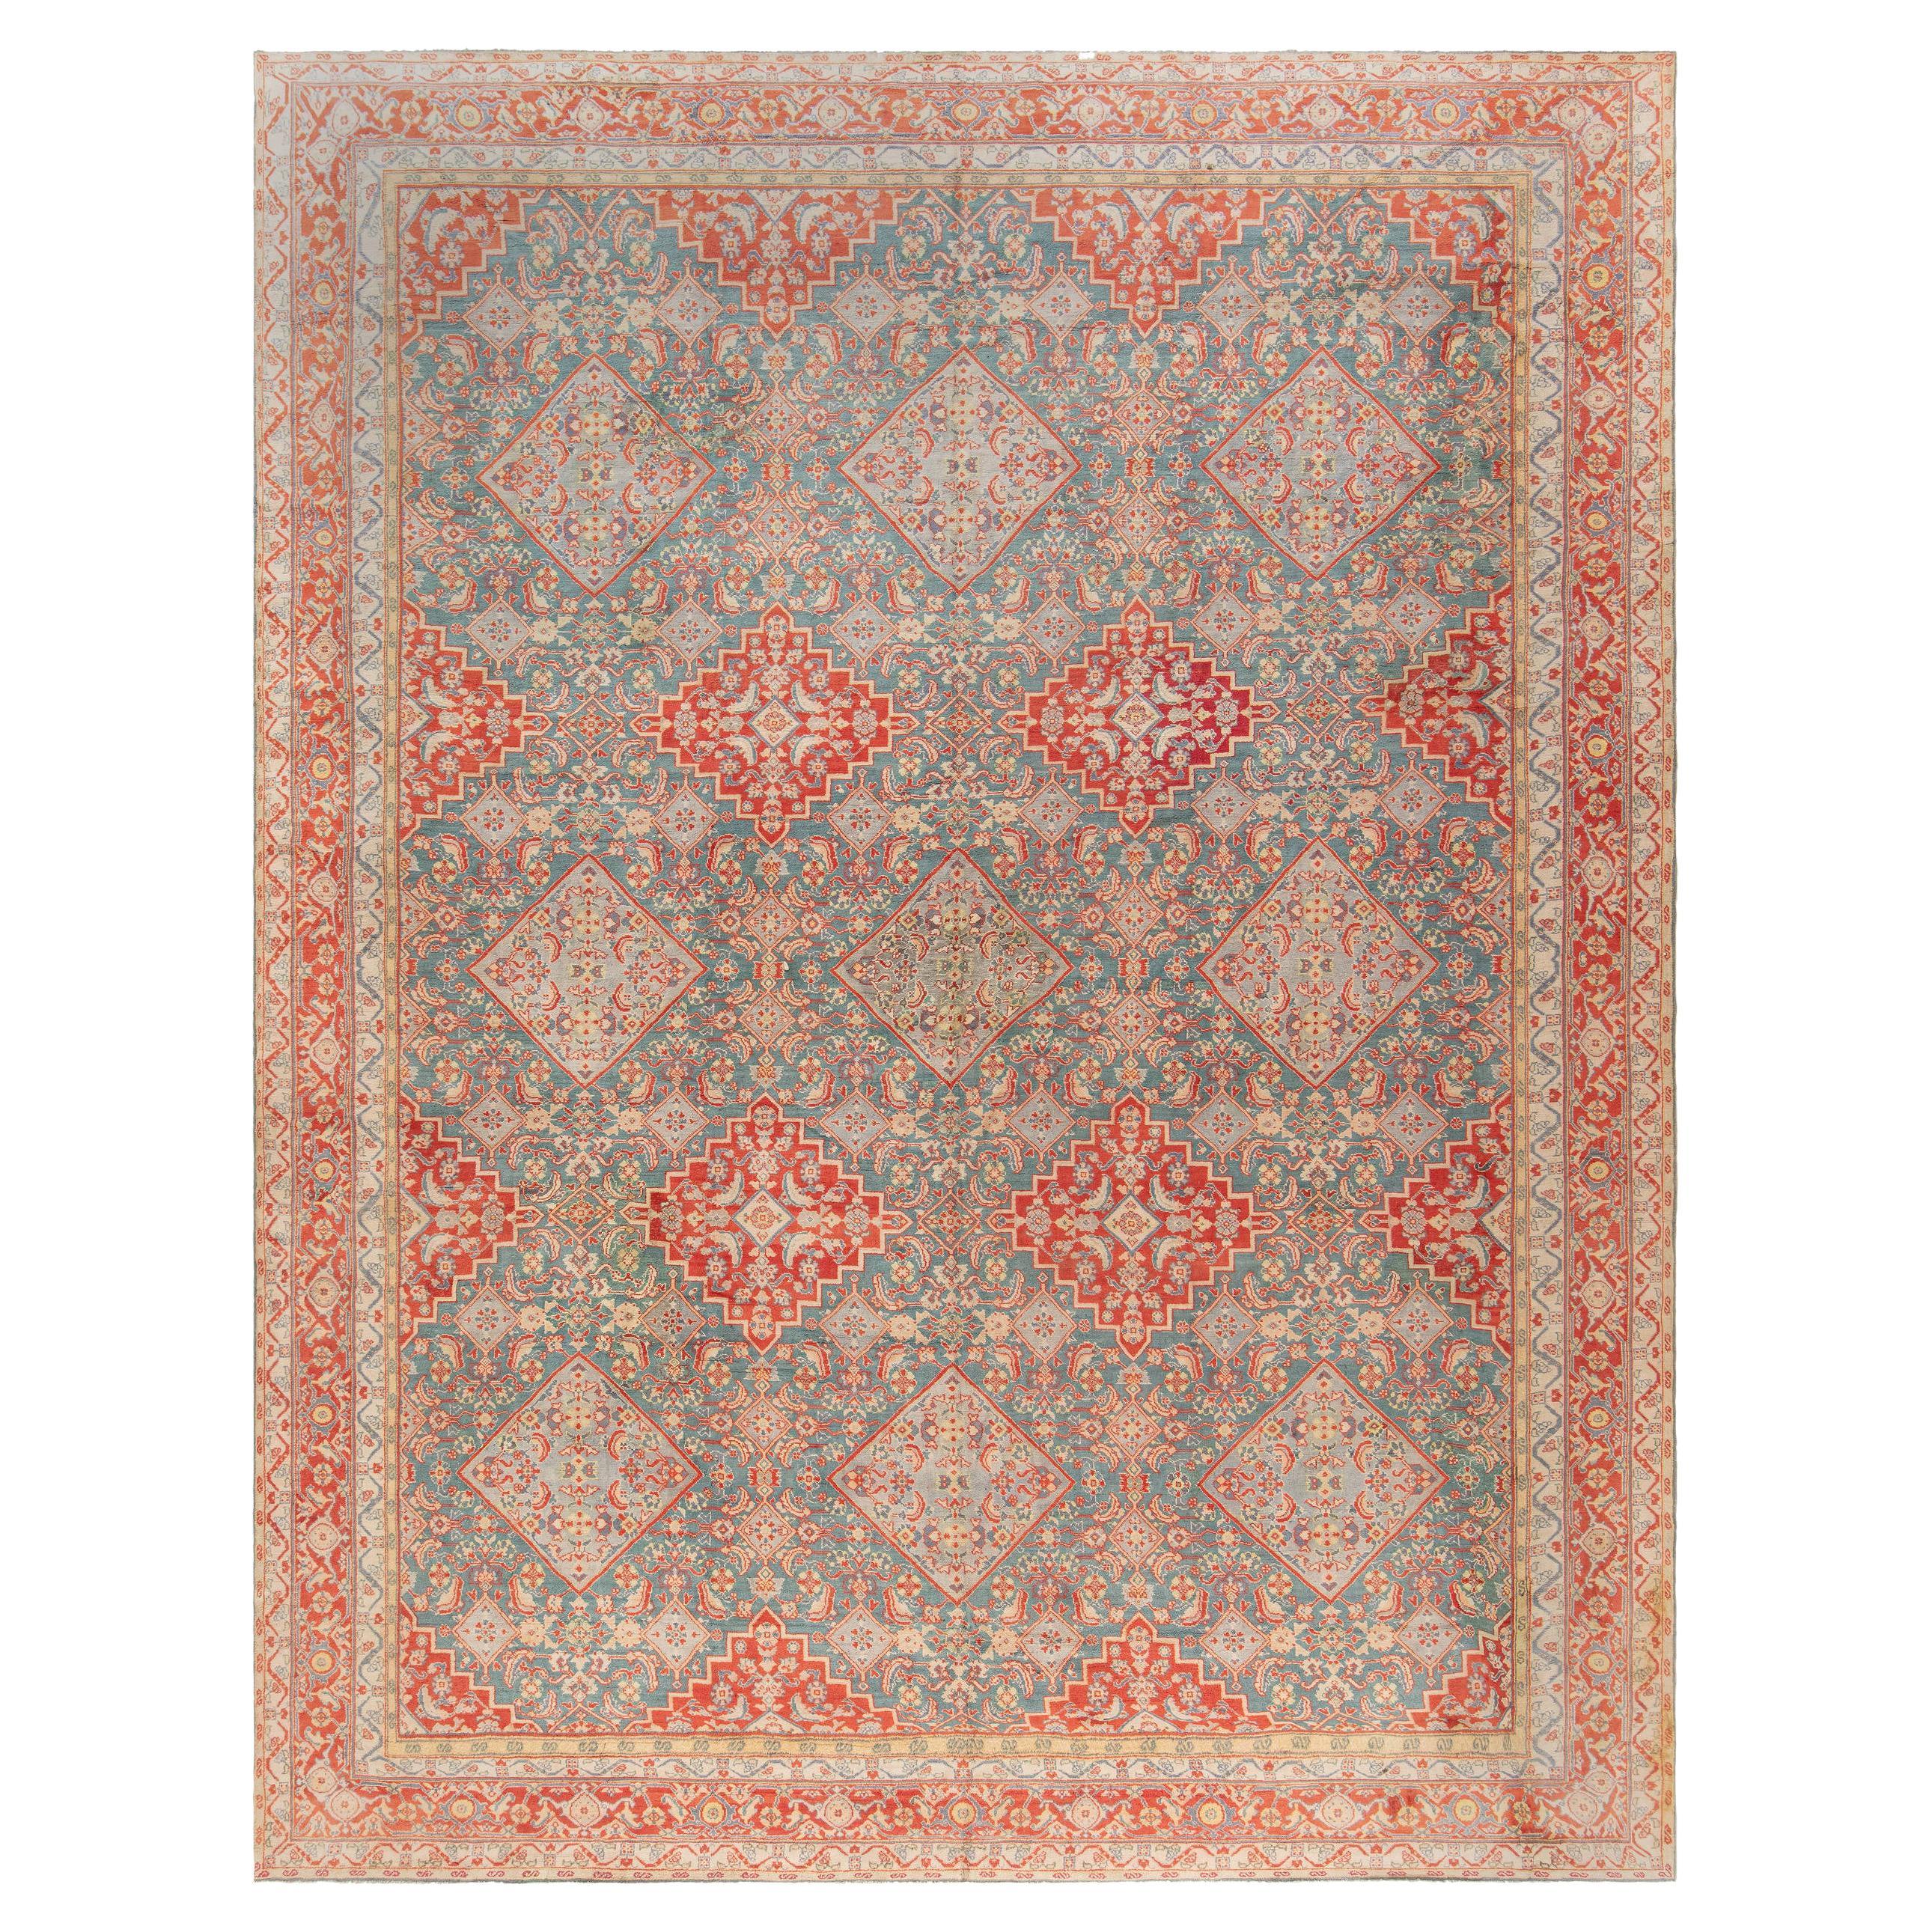 Antique Indian Agra Red Blue Handmade Rug